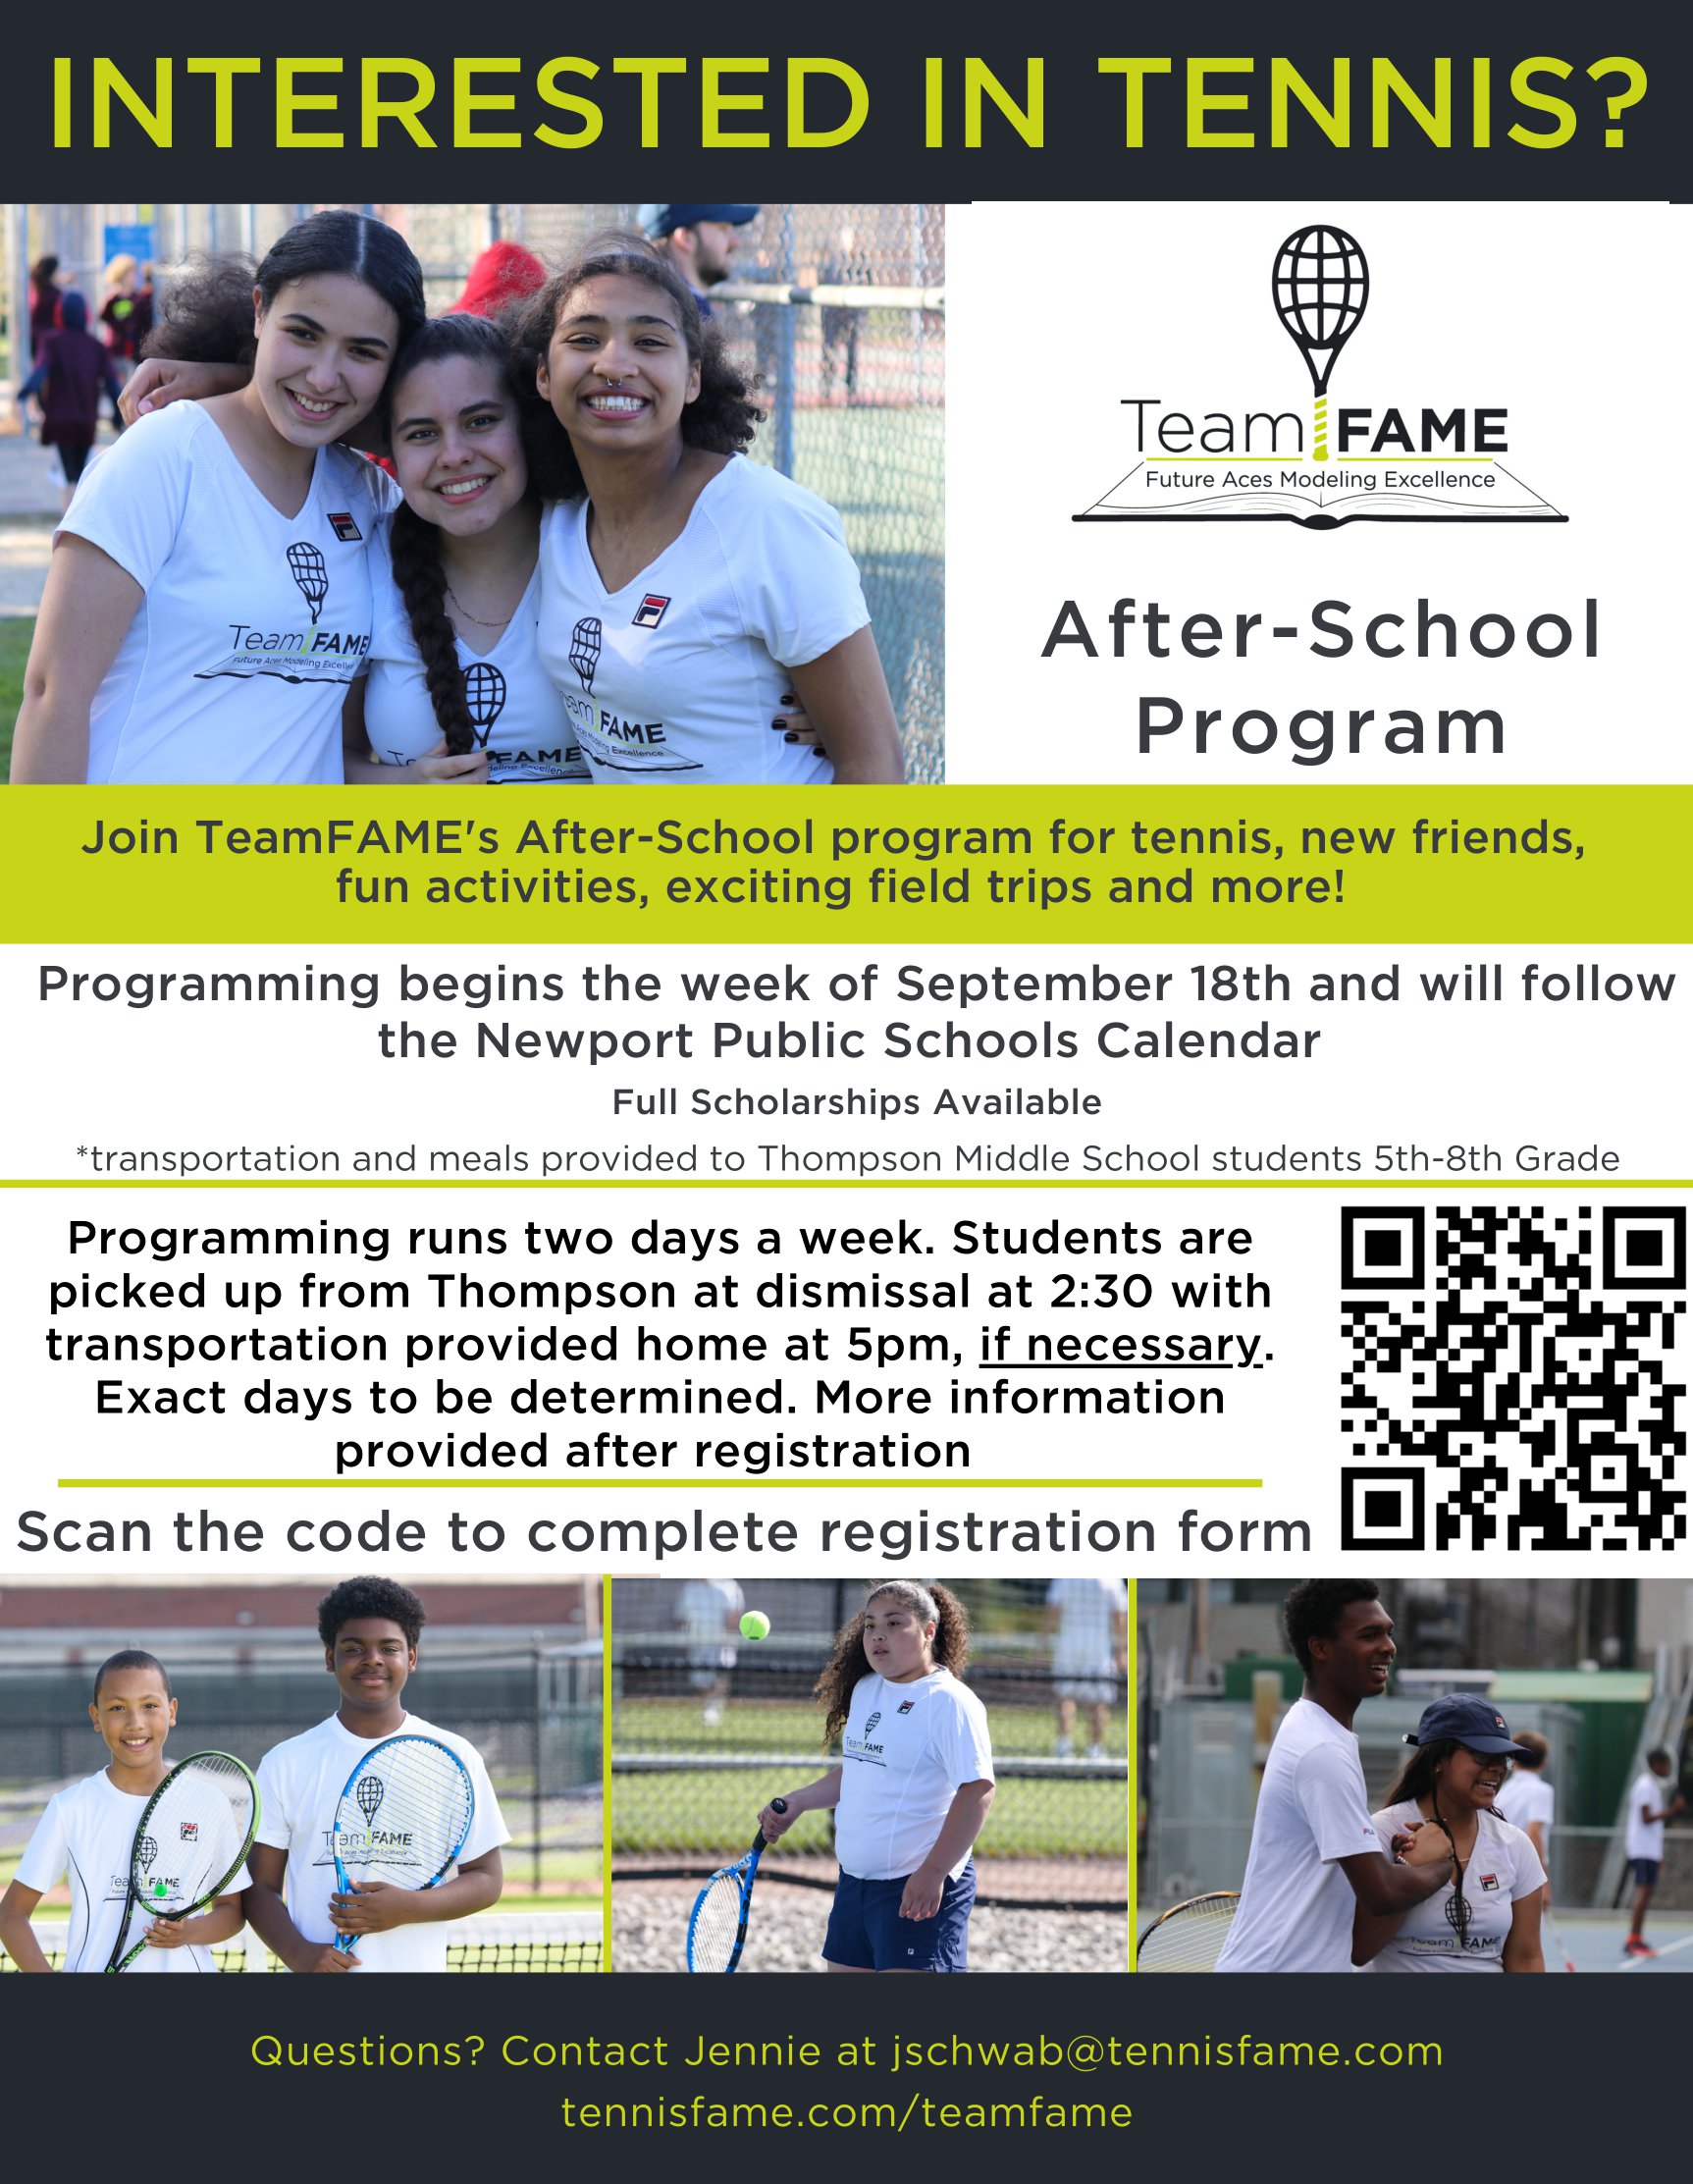 INTERESTED IN TENNIS? Team FAME Future Aces Modeling Excellence Team FAME NO RAME PAME After-School Program Join TeamFAME's After-School program for tennis, new friends, fun activities, exciting field trips and more! Programming begins the week of September 18th and will follow the Newport Public Schools Calendar Full Scholarships Available *transportation and meals provided to Thompson Middle School students 5th-8th Grade Programming runs two days a week. Students are picked up from Thompson at dismissal at 2:30 with transportation provided home at 5pm, if necessary. Exact days to be determined. More information provided after registration Scan the code to complete registration form aM FAME Questions? Contact Jennie at jschwab@tennisfame.com tennisfame.com/teamfame